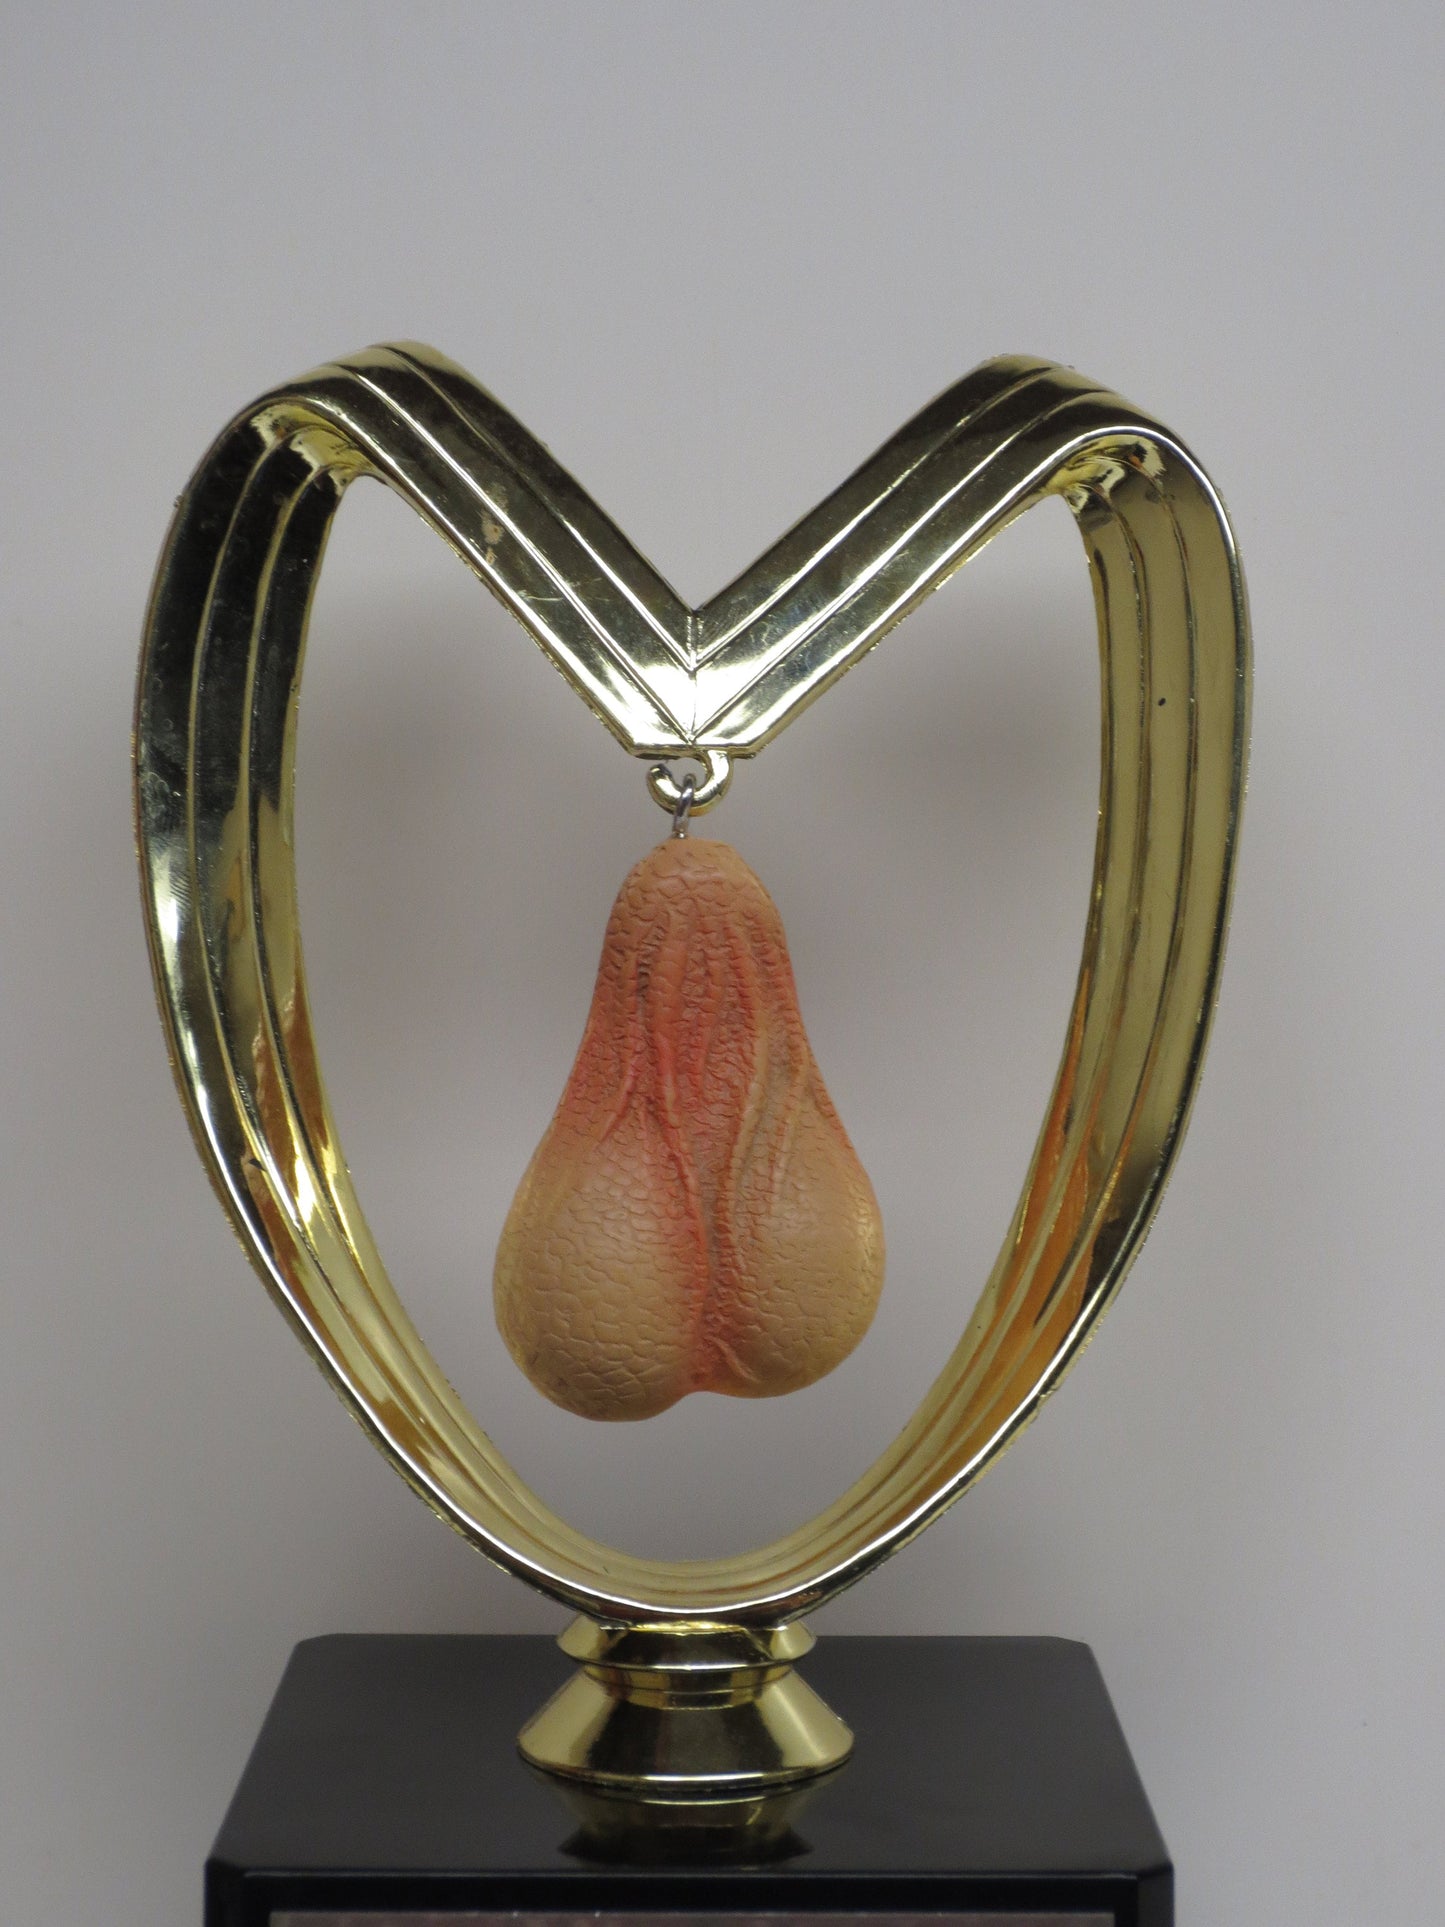 Funny Wedding Gift They're Yours Now Custom Trophy Engagement Gift Aww Nuts! Just Married Adult Humor Grow A Pair Gag Gift Penis Testicle